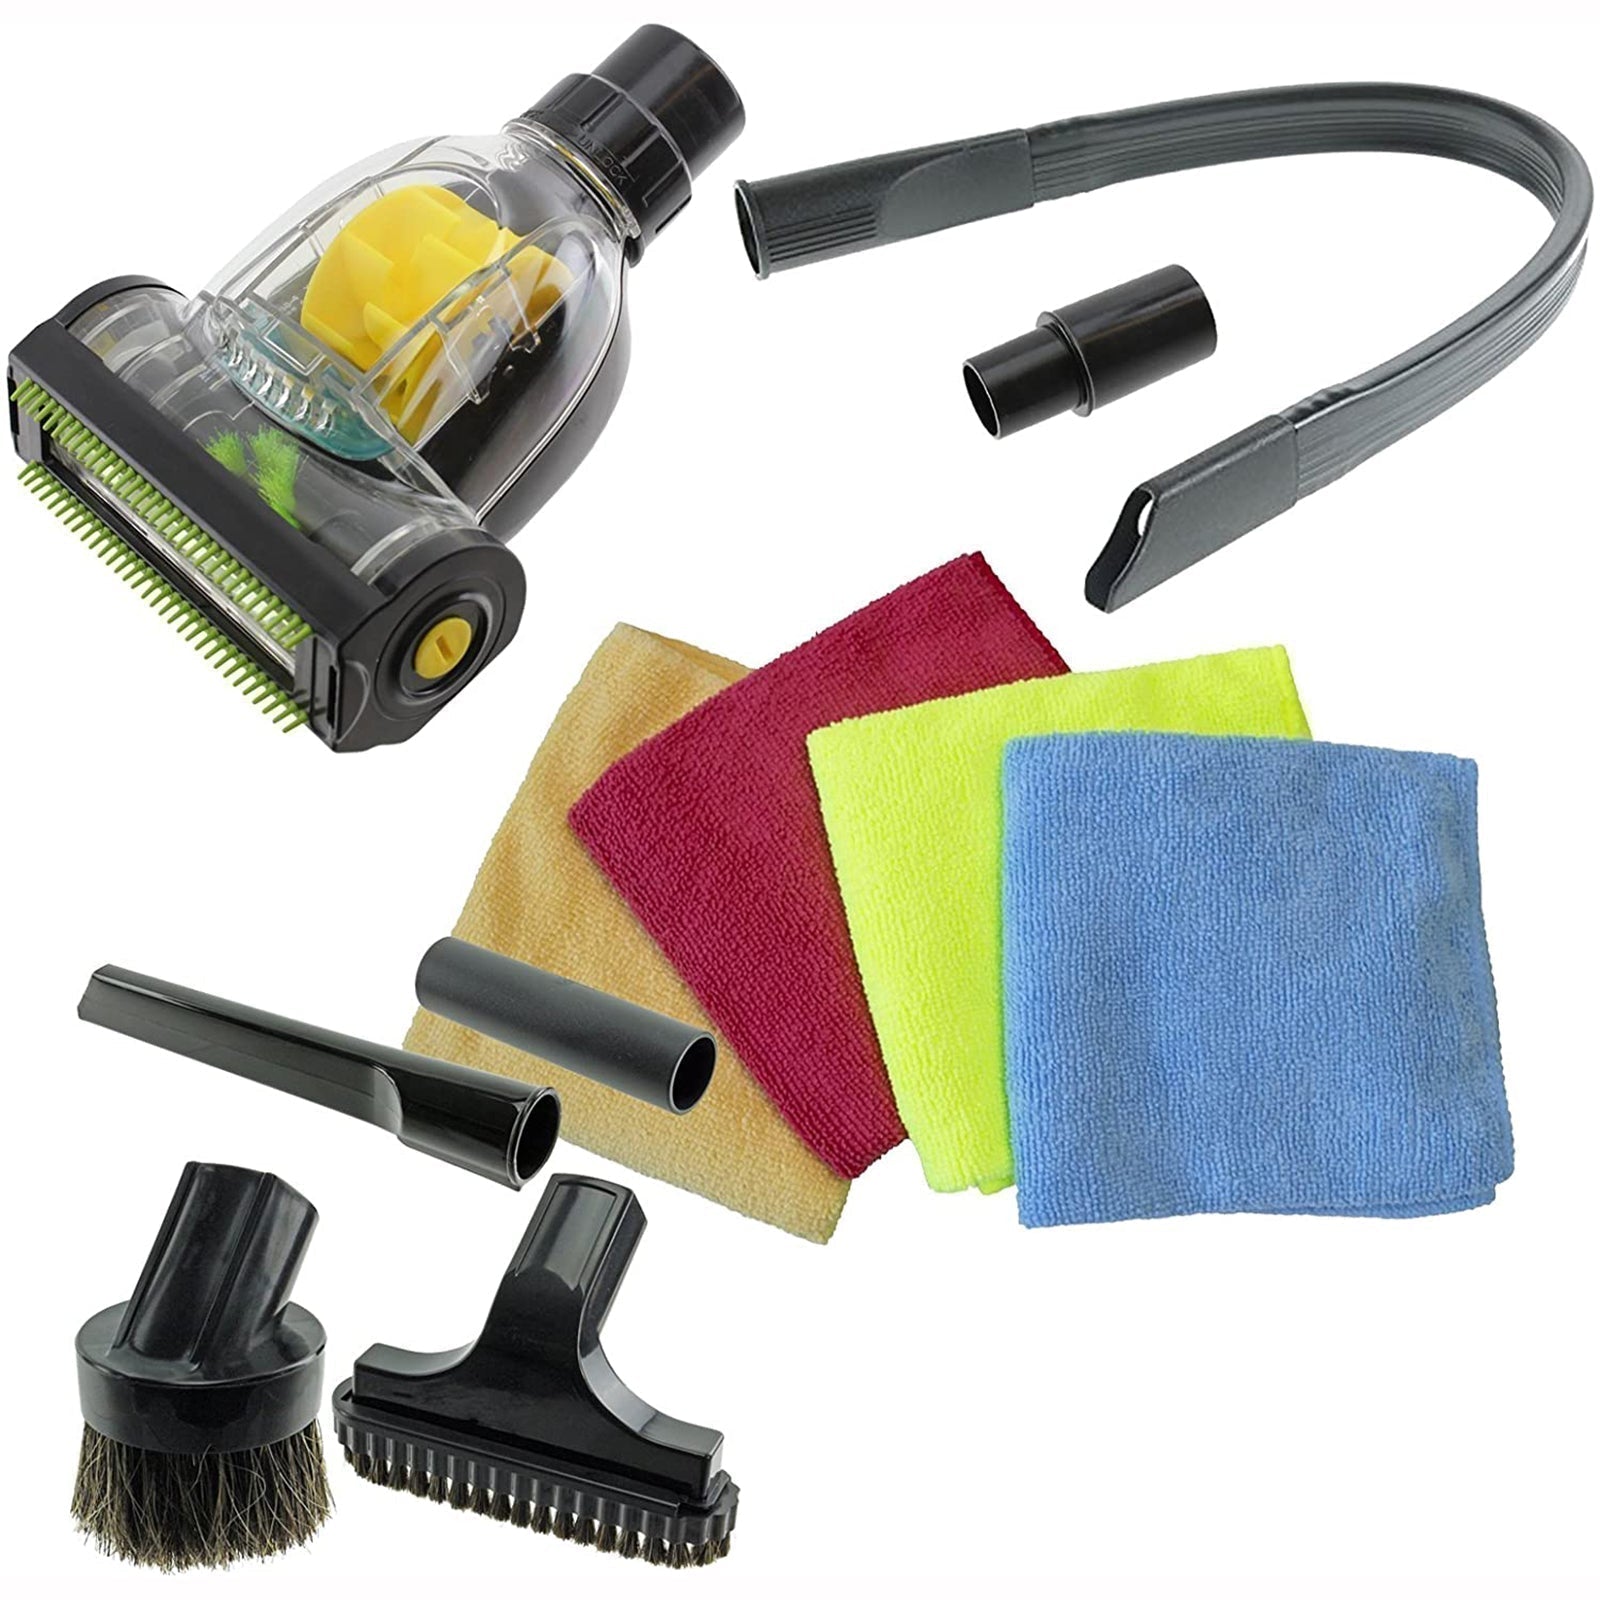 Car Valet Cleaning Tool Kit compatible with EINHELL Vacuum Cleaner (32mm/35mm)